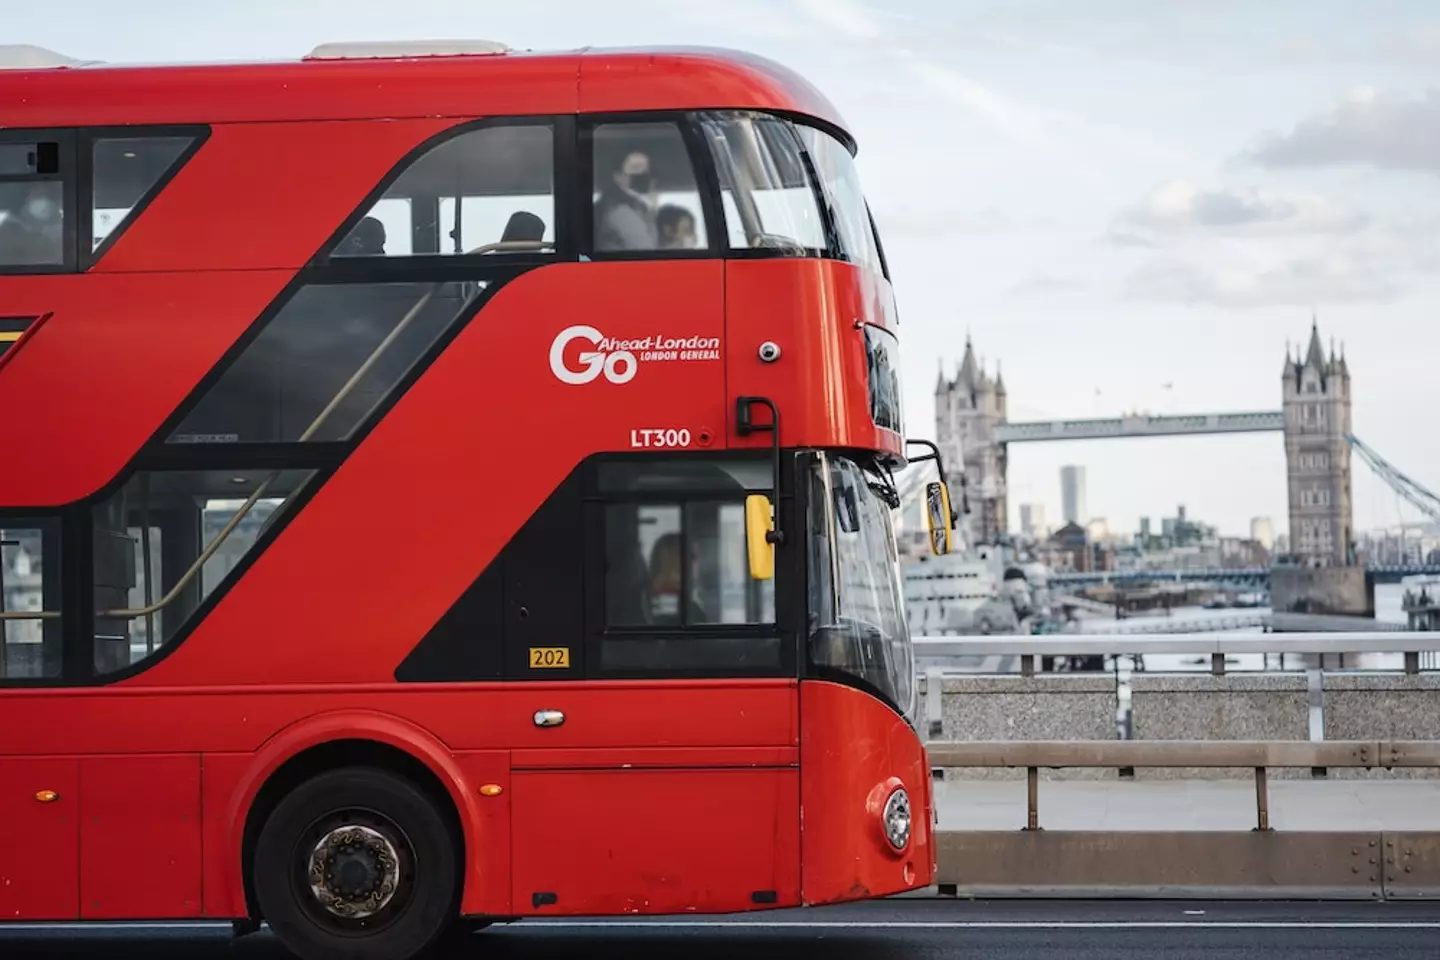 UK buses that drive in urban areas aren't going as far or fast.